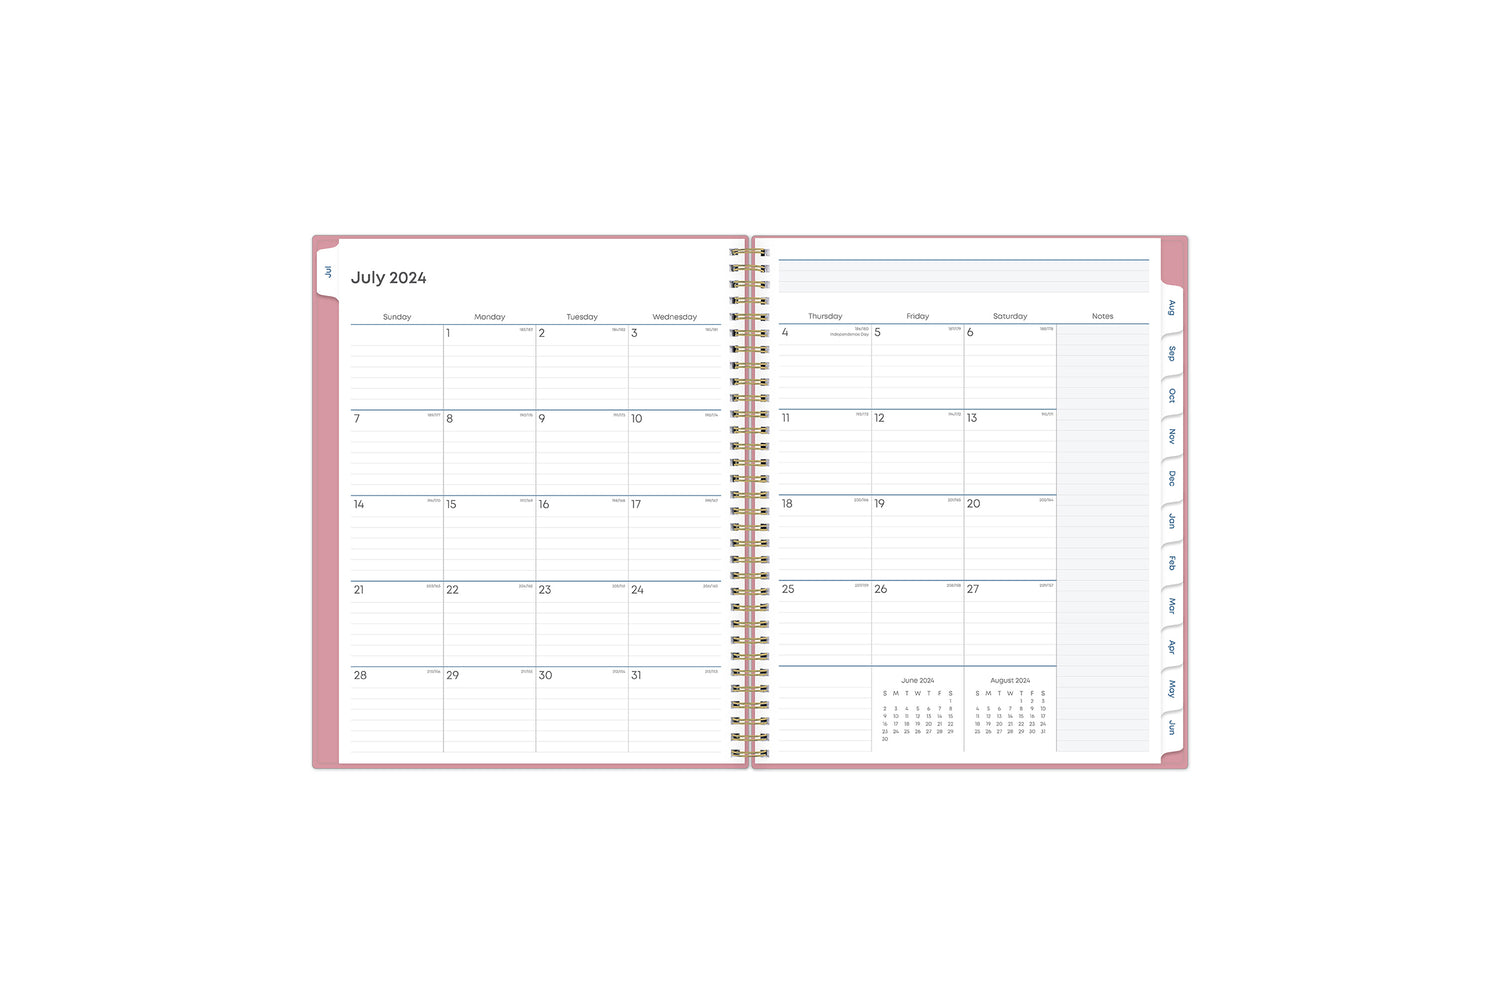  teacher lesson planner monthly view featuring clean writing space for projects, field trips, goals, deadlines, notes section, reference calendars and pink monthly tabs in 8.5x11 size